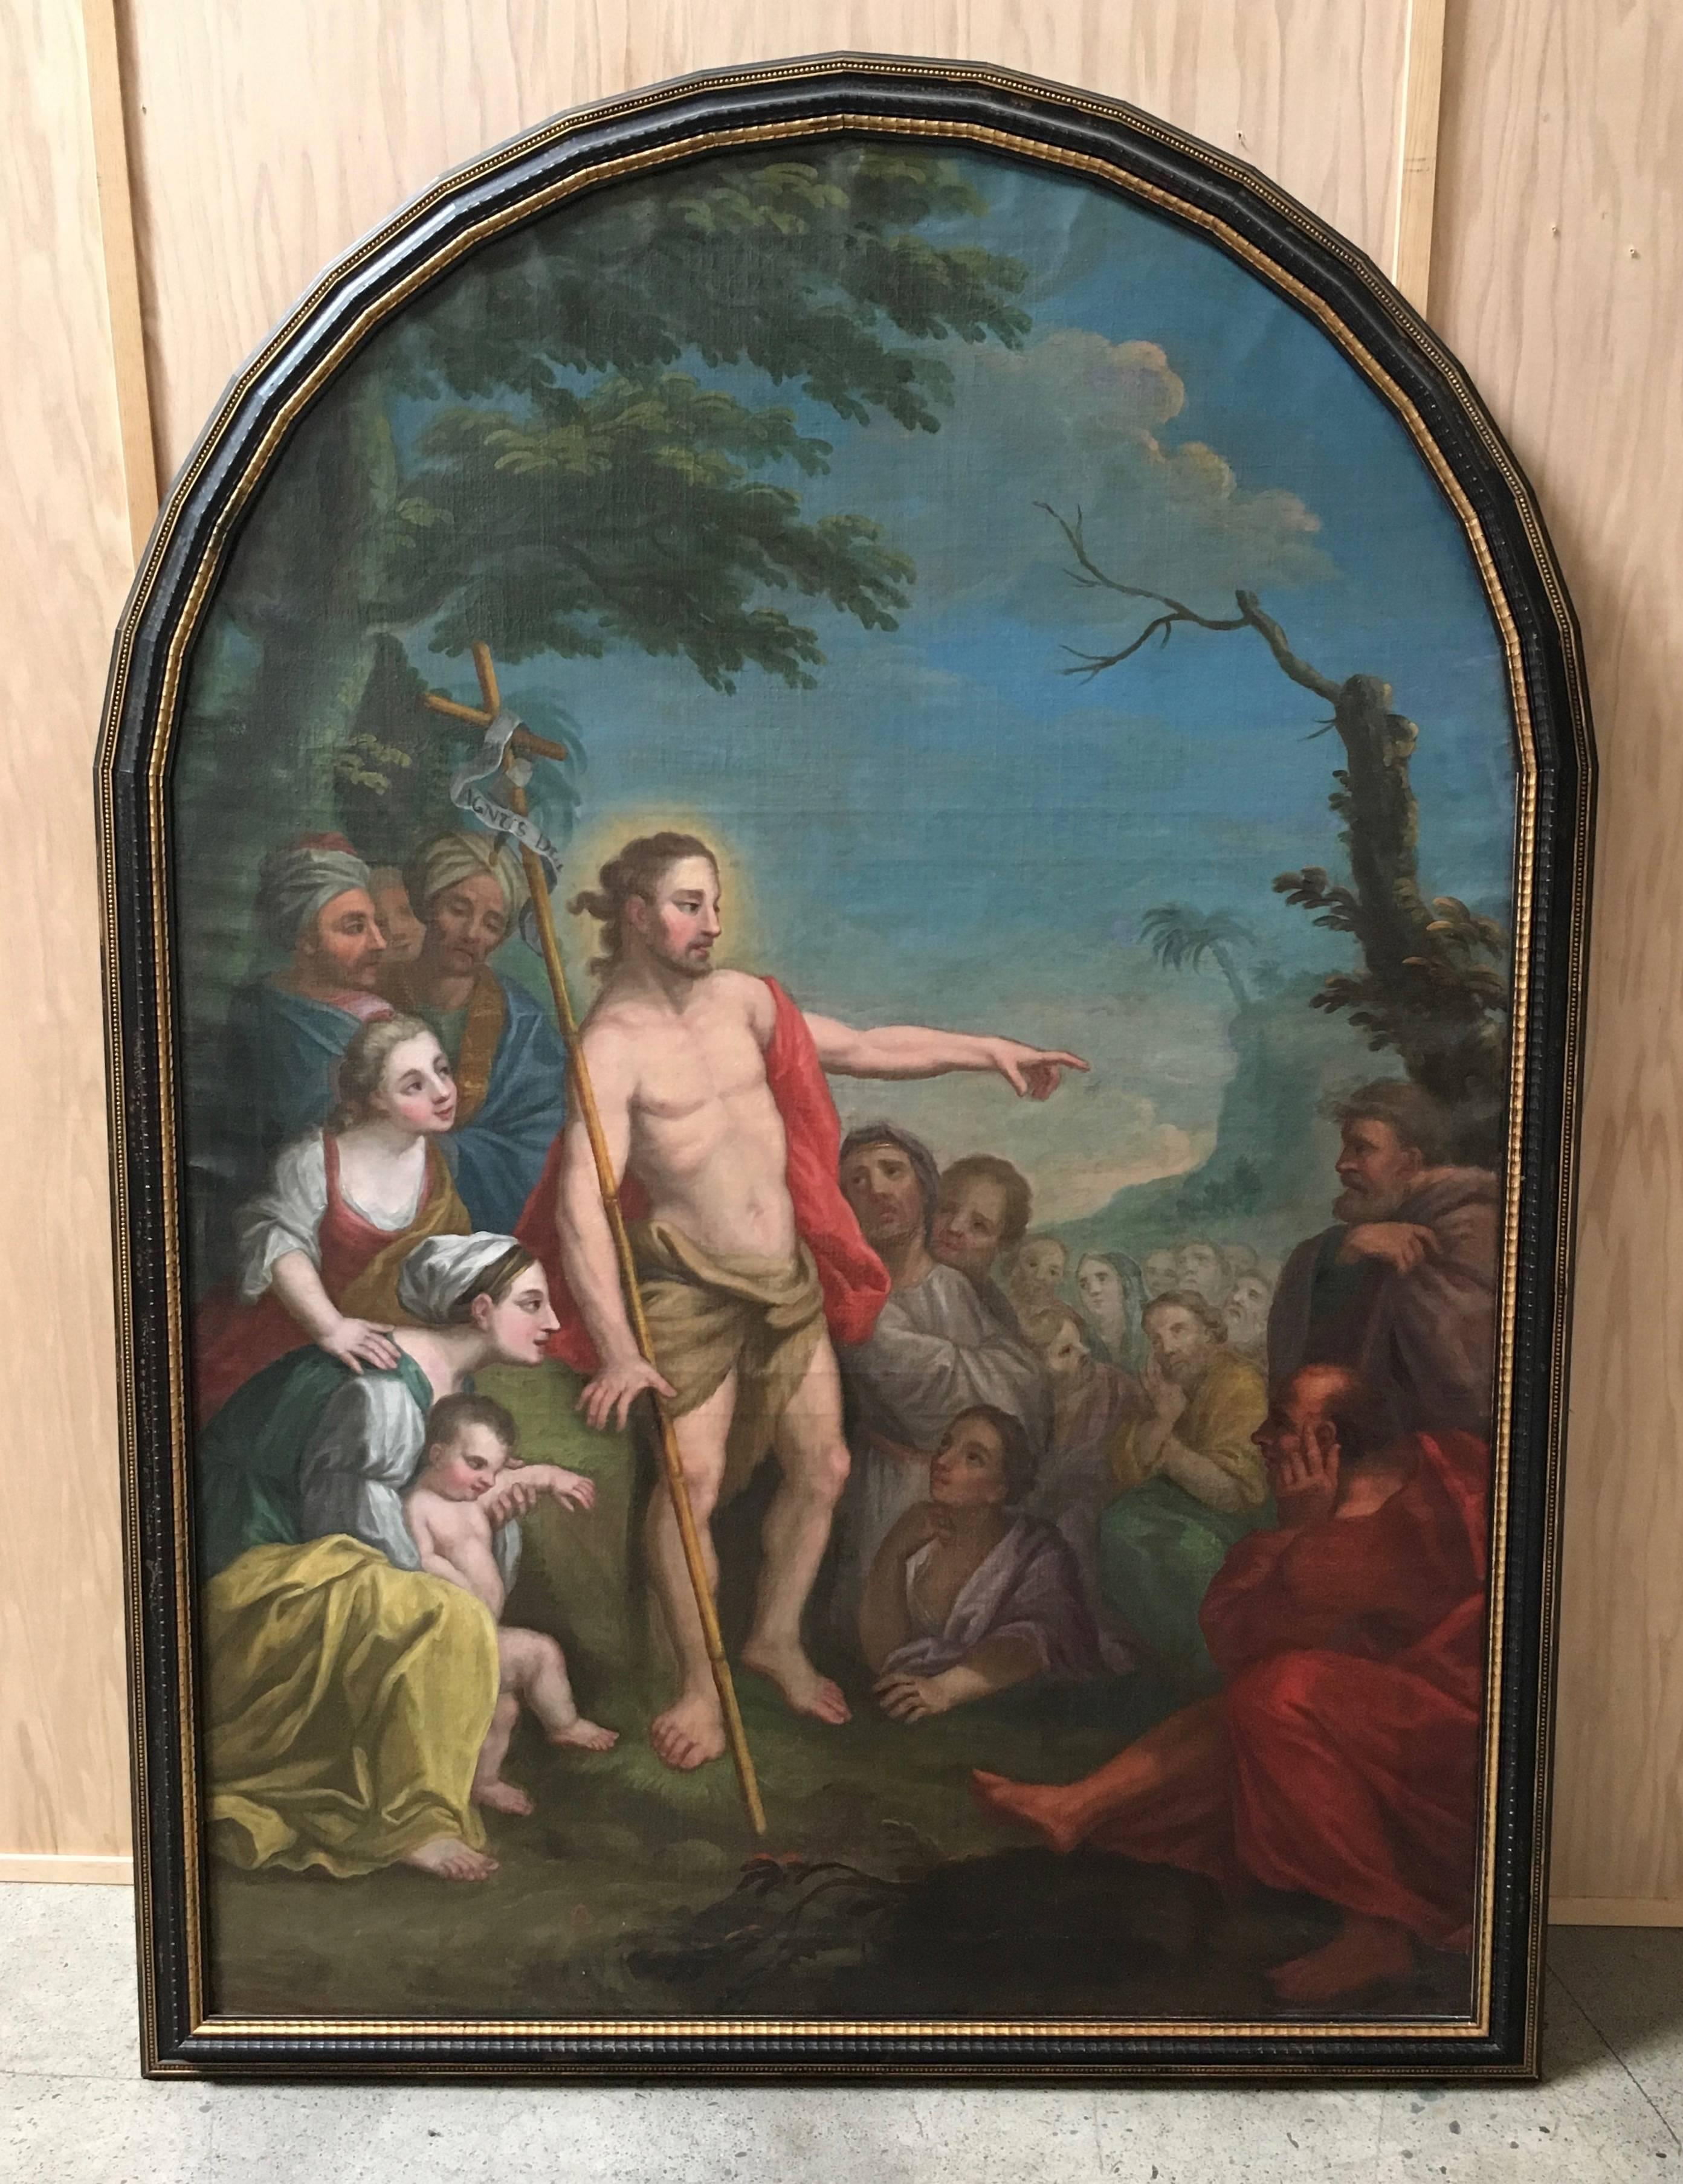 18th century antique old master painting of St. Raymond Nonnatus Saint Raymond Nonnatus is the patron for life, for expectant mothers, and for families.
Saint Raymond did go on Campaign for the Christian captives to save them. And while he was there